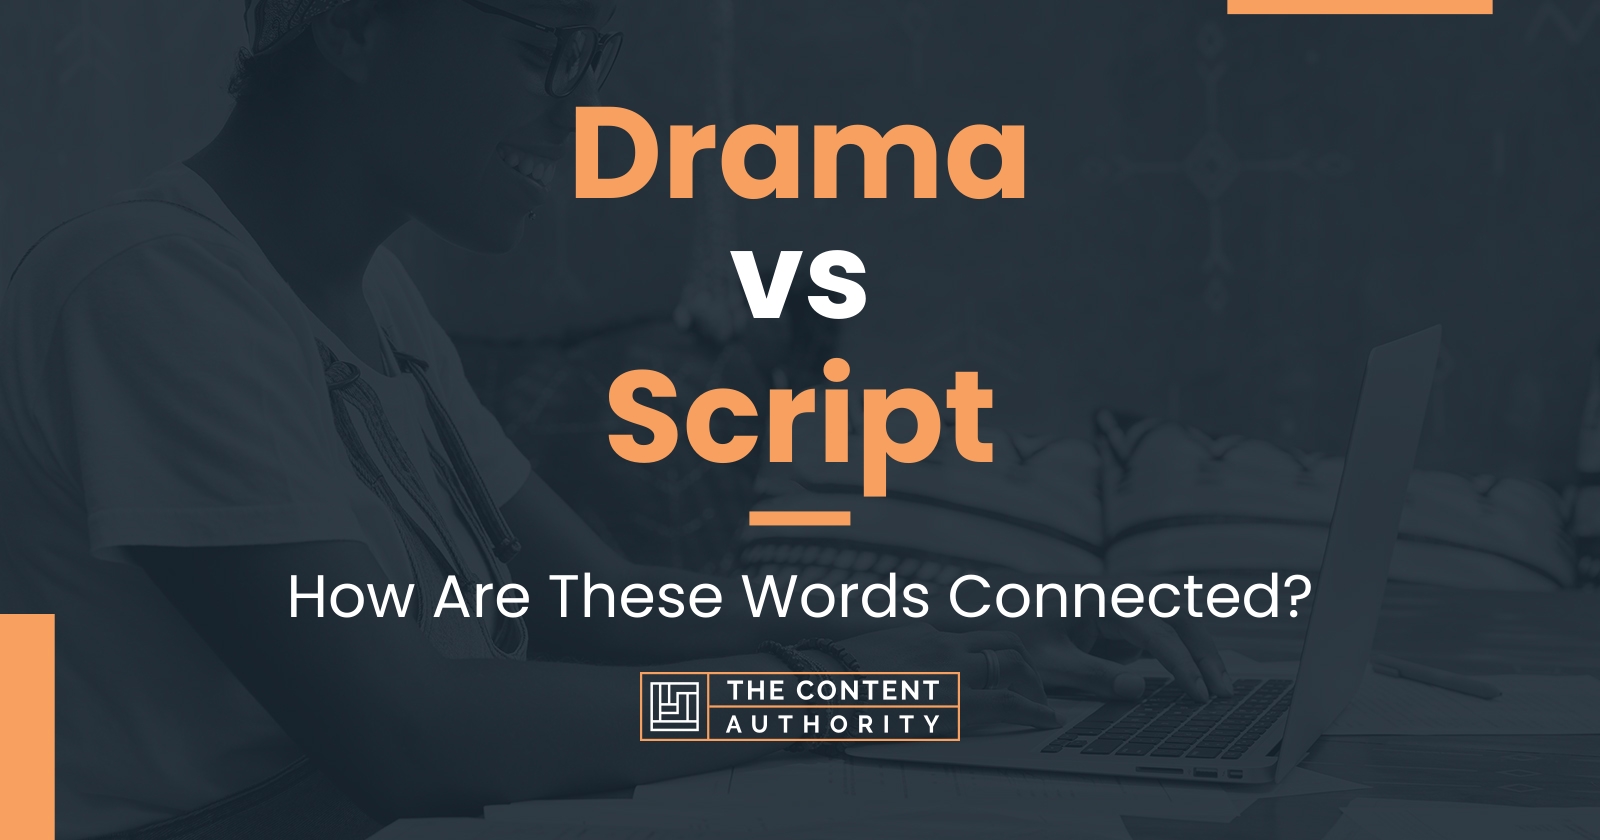 Drama vs Script: How Are These Words Connected?